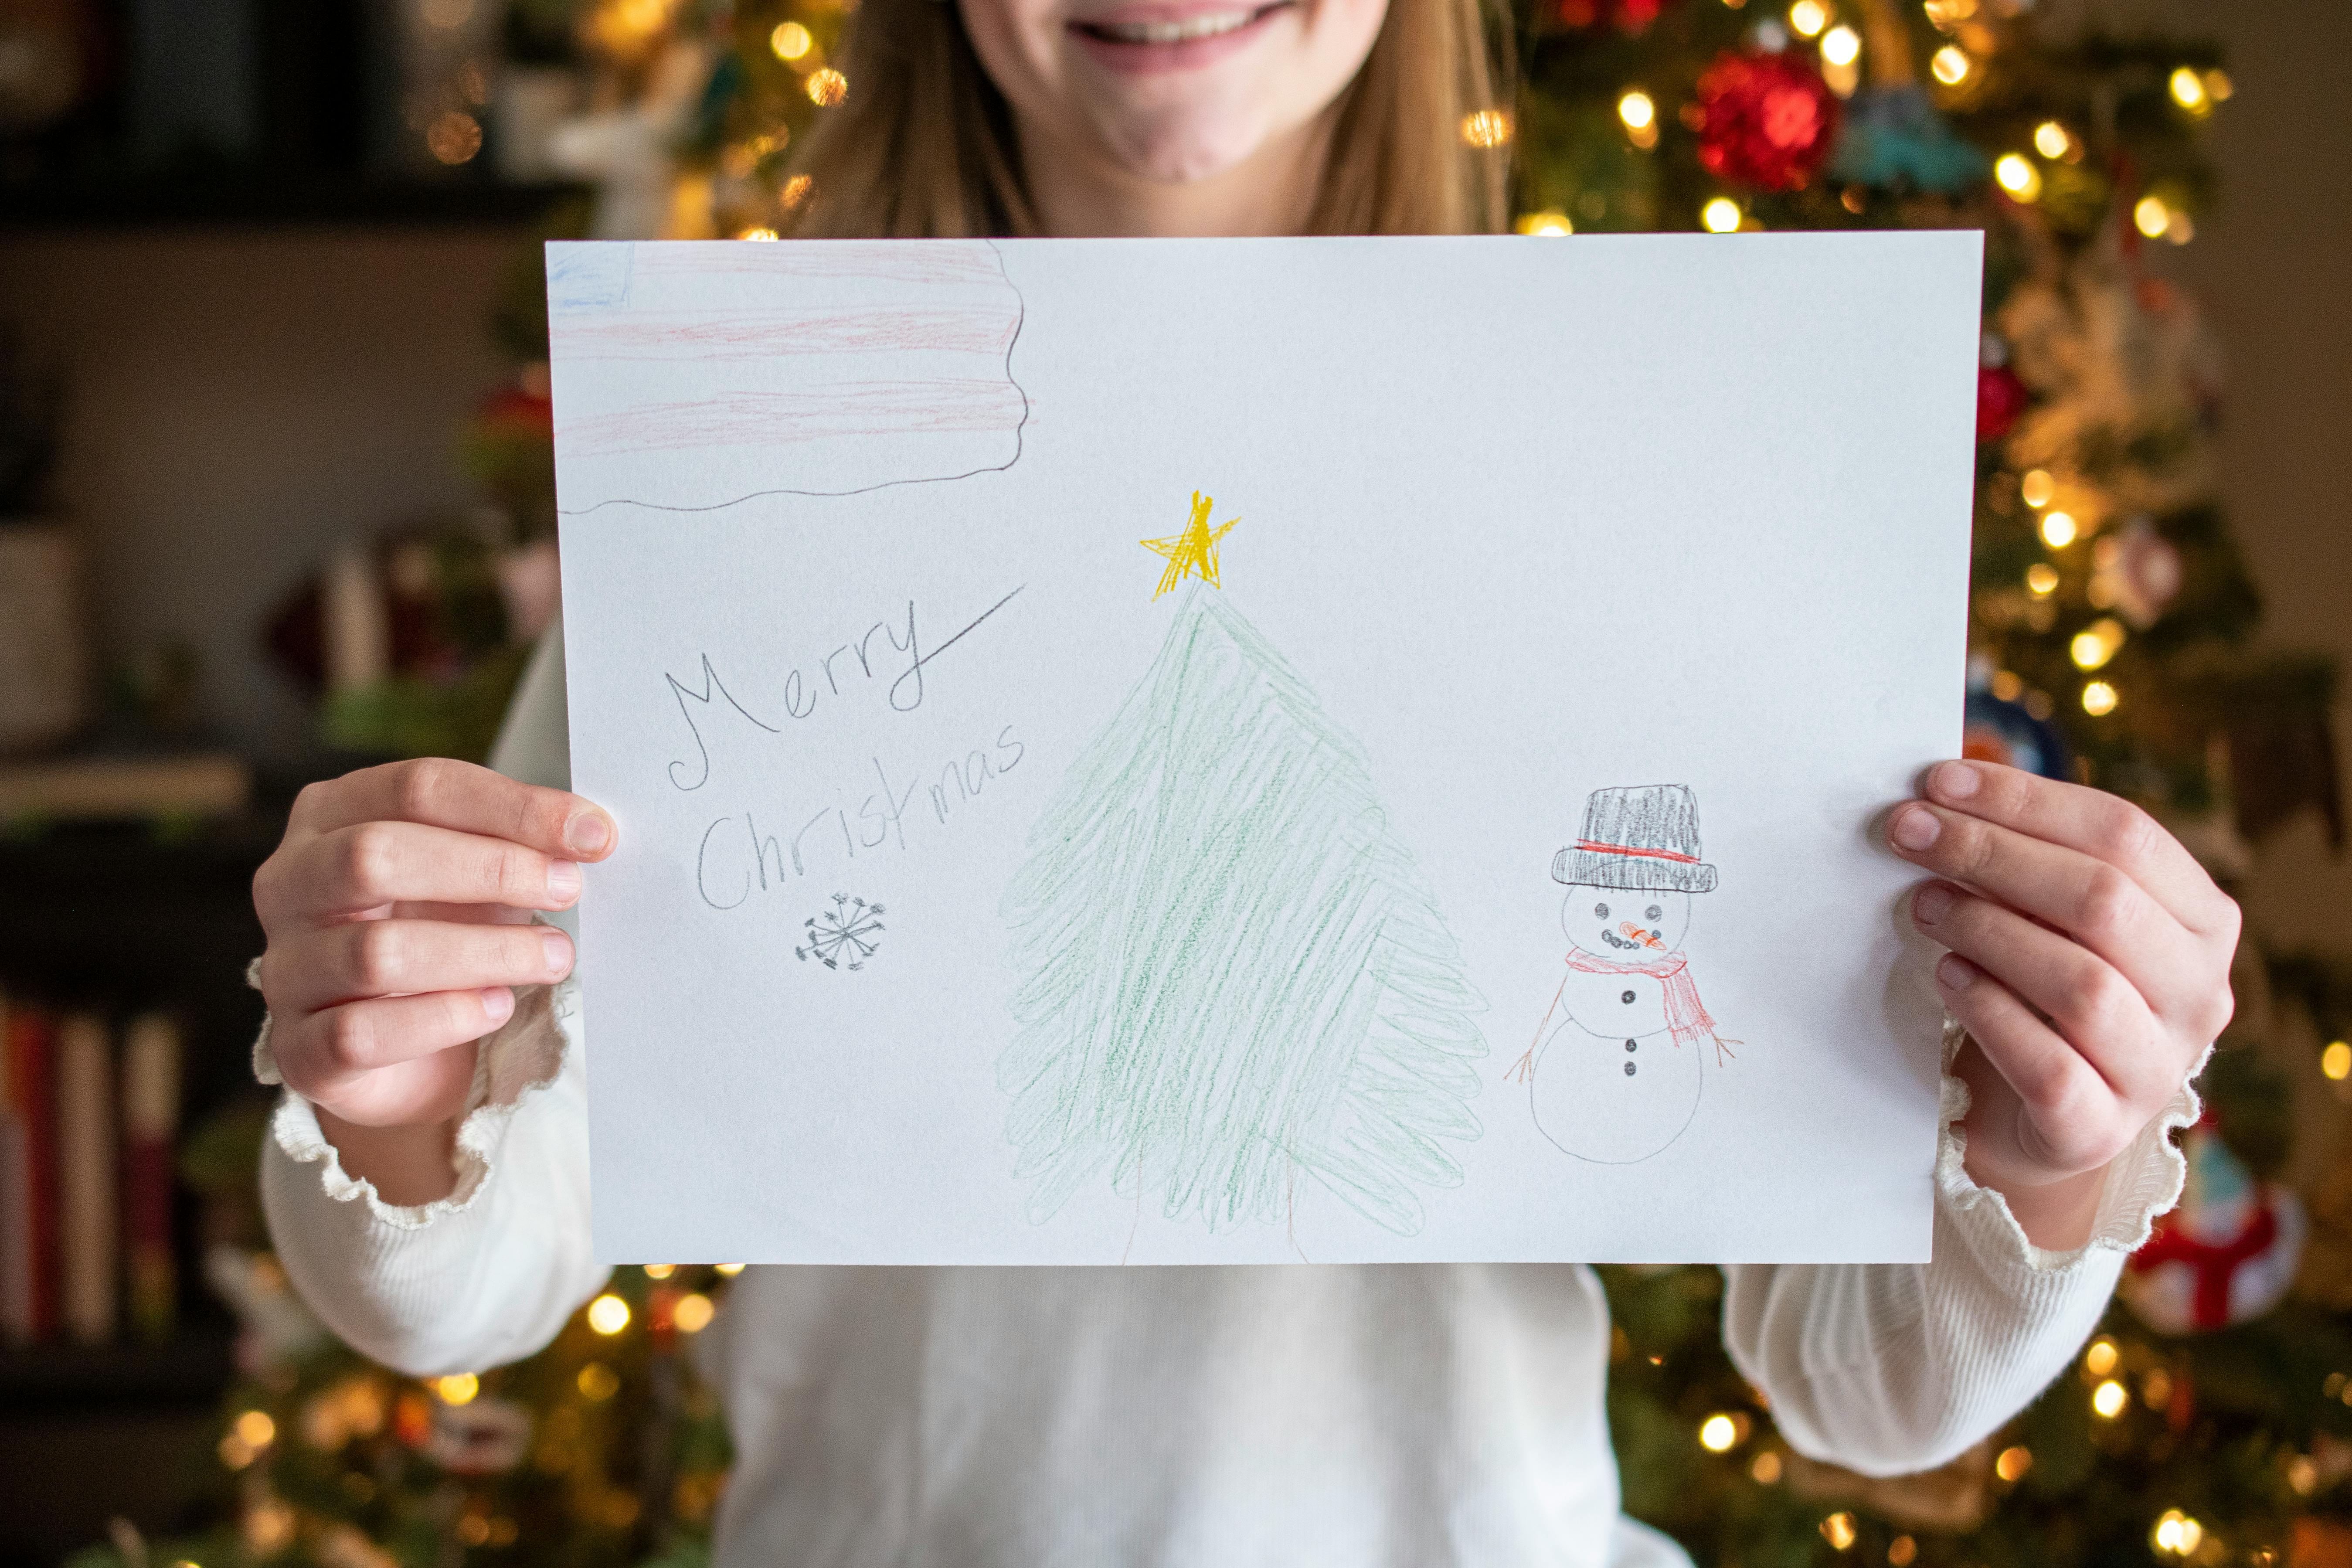 A little girl holding a drawing in front of a Christmas tree.